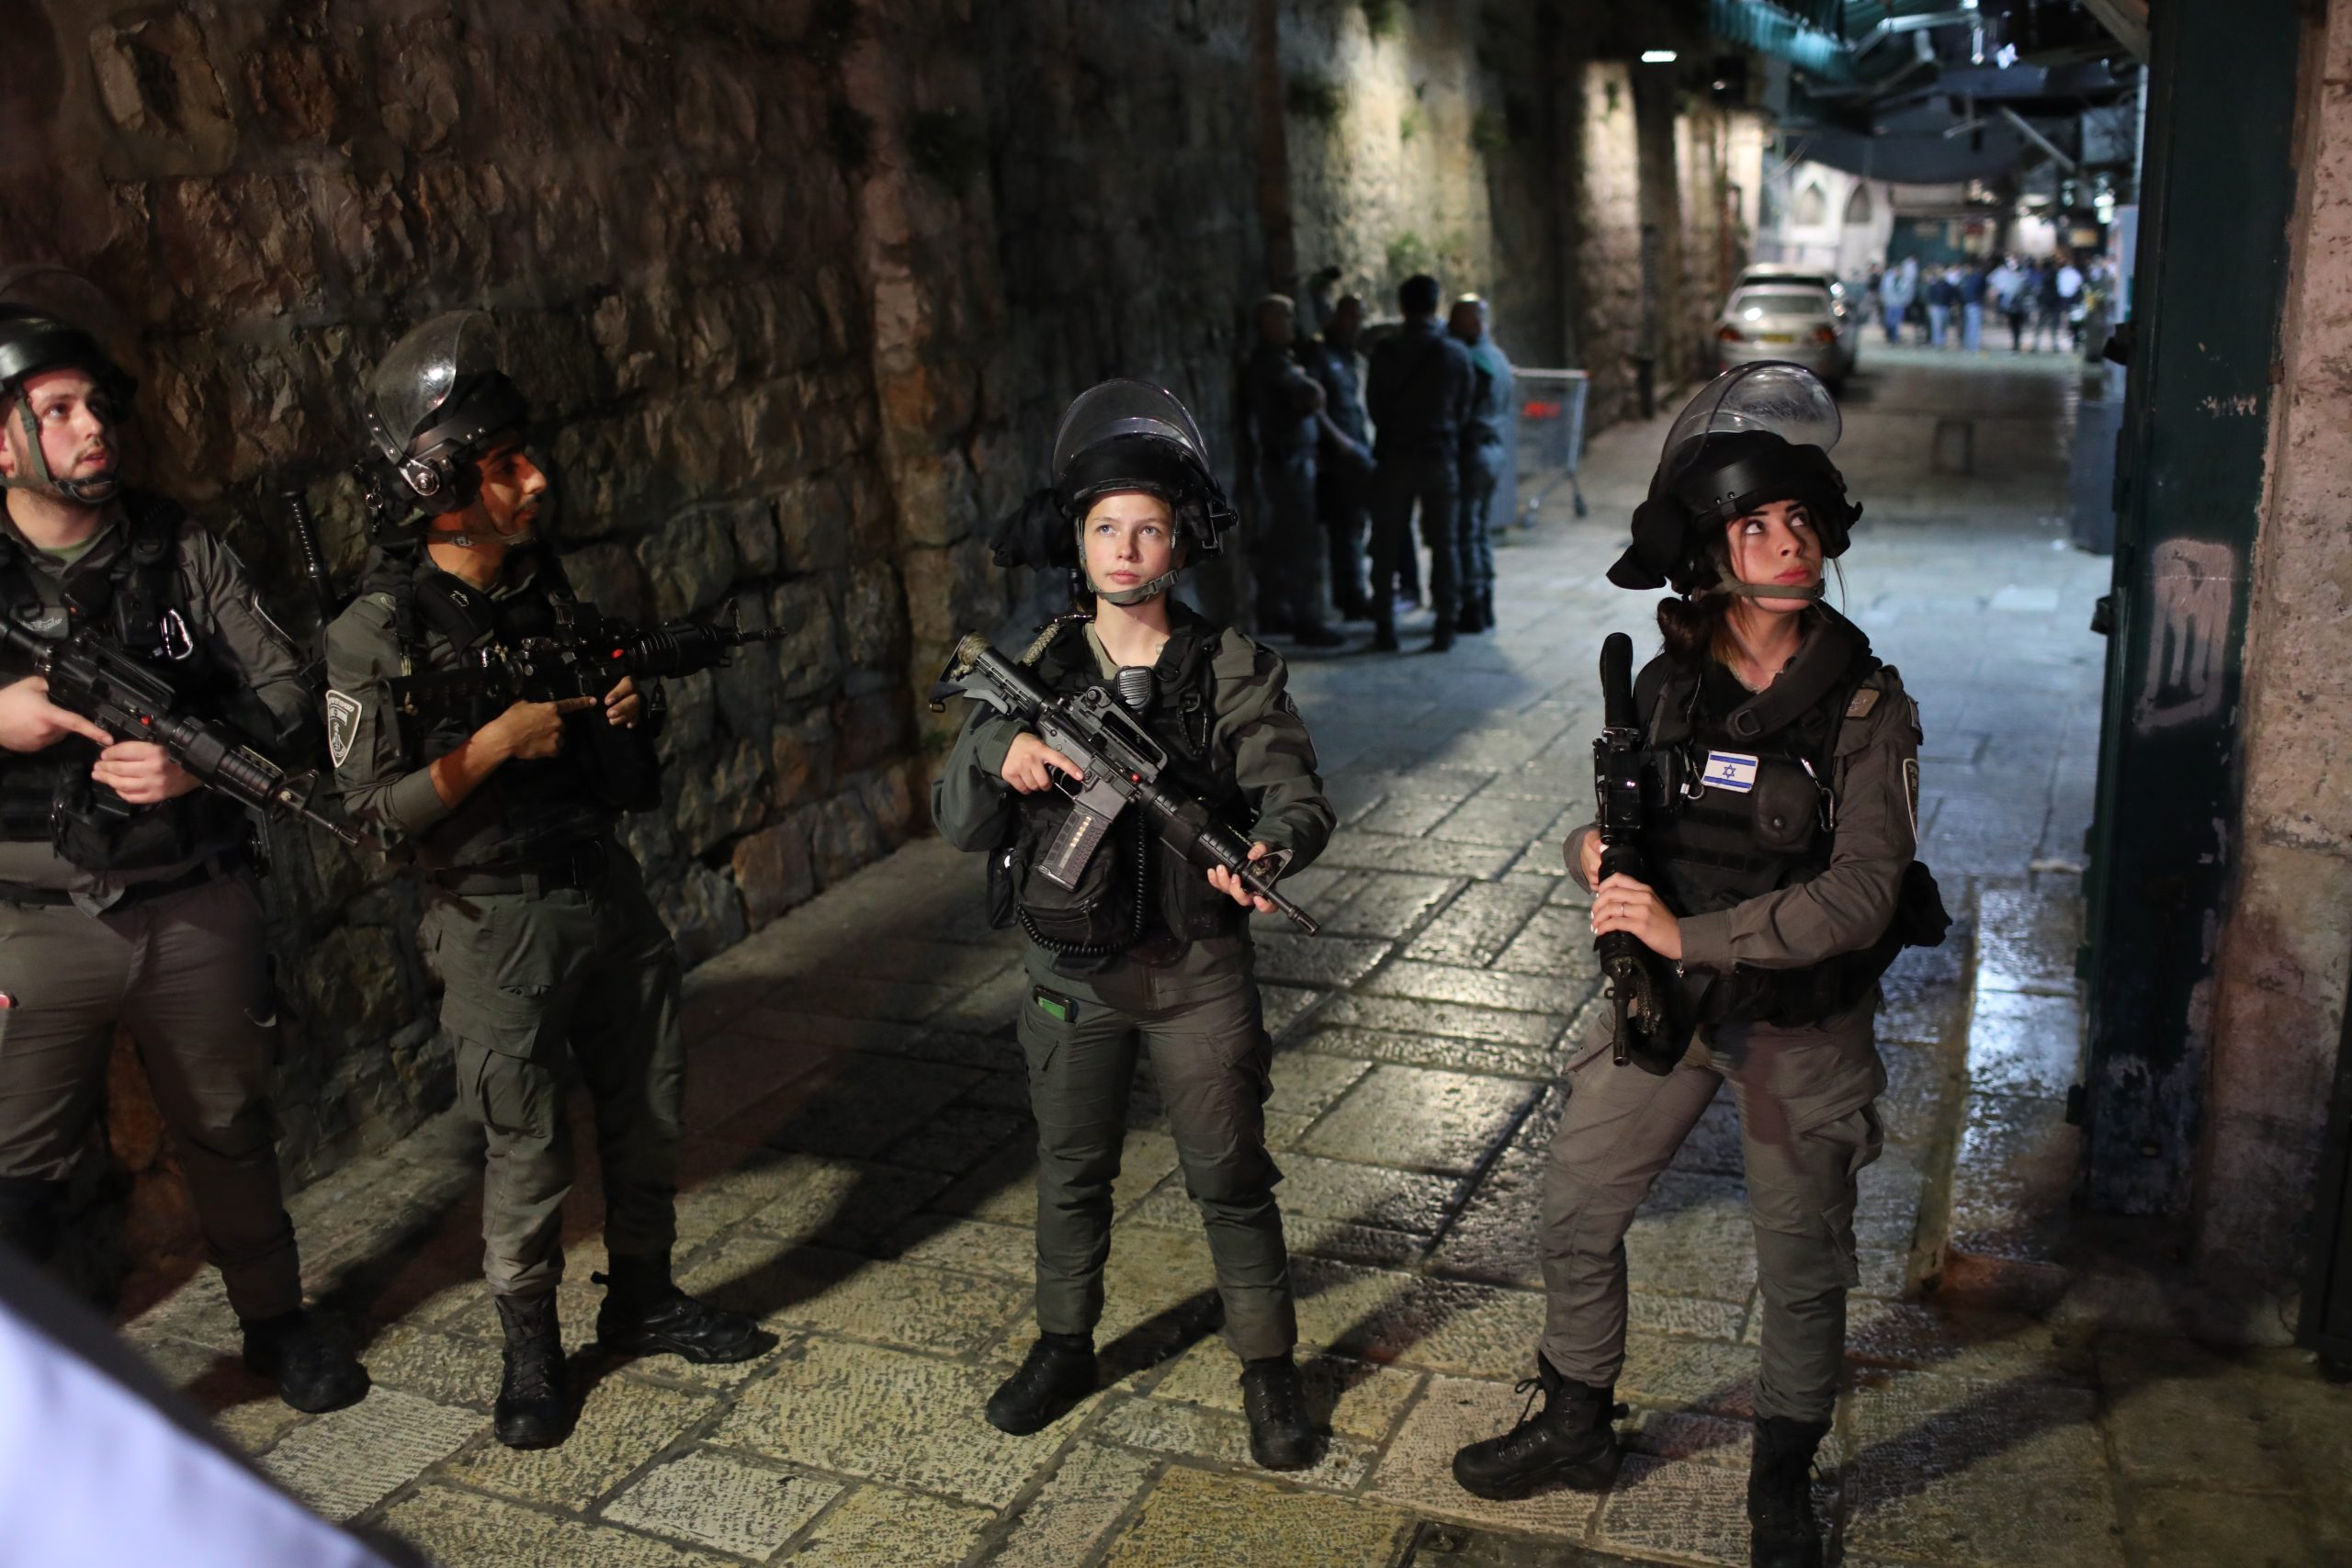 epa09587583 Israeli police at the scene of a stabbing near Damascus gate at the old city of Jerusalem,  17 November 2021. According to Israeli Police, a man with a knife attacked two Israeli police officers wounded them and the attacker has been shot dead by security forces.  EPA/ABIR SULTAN